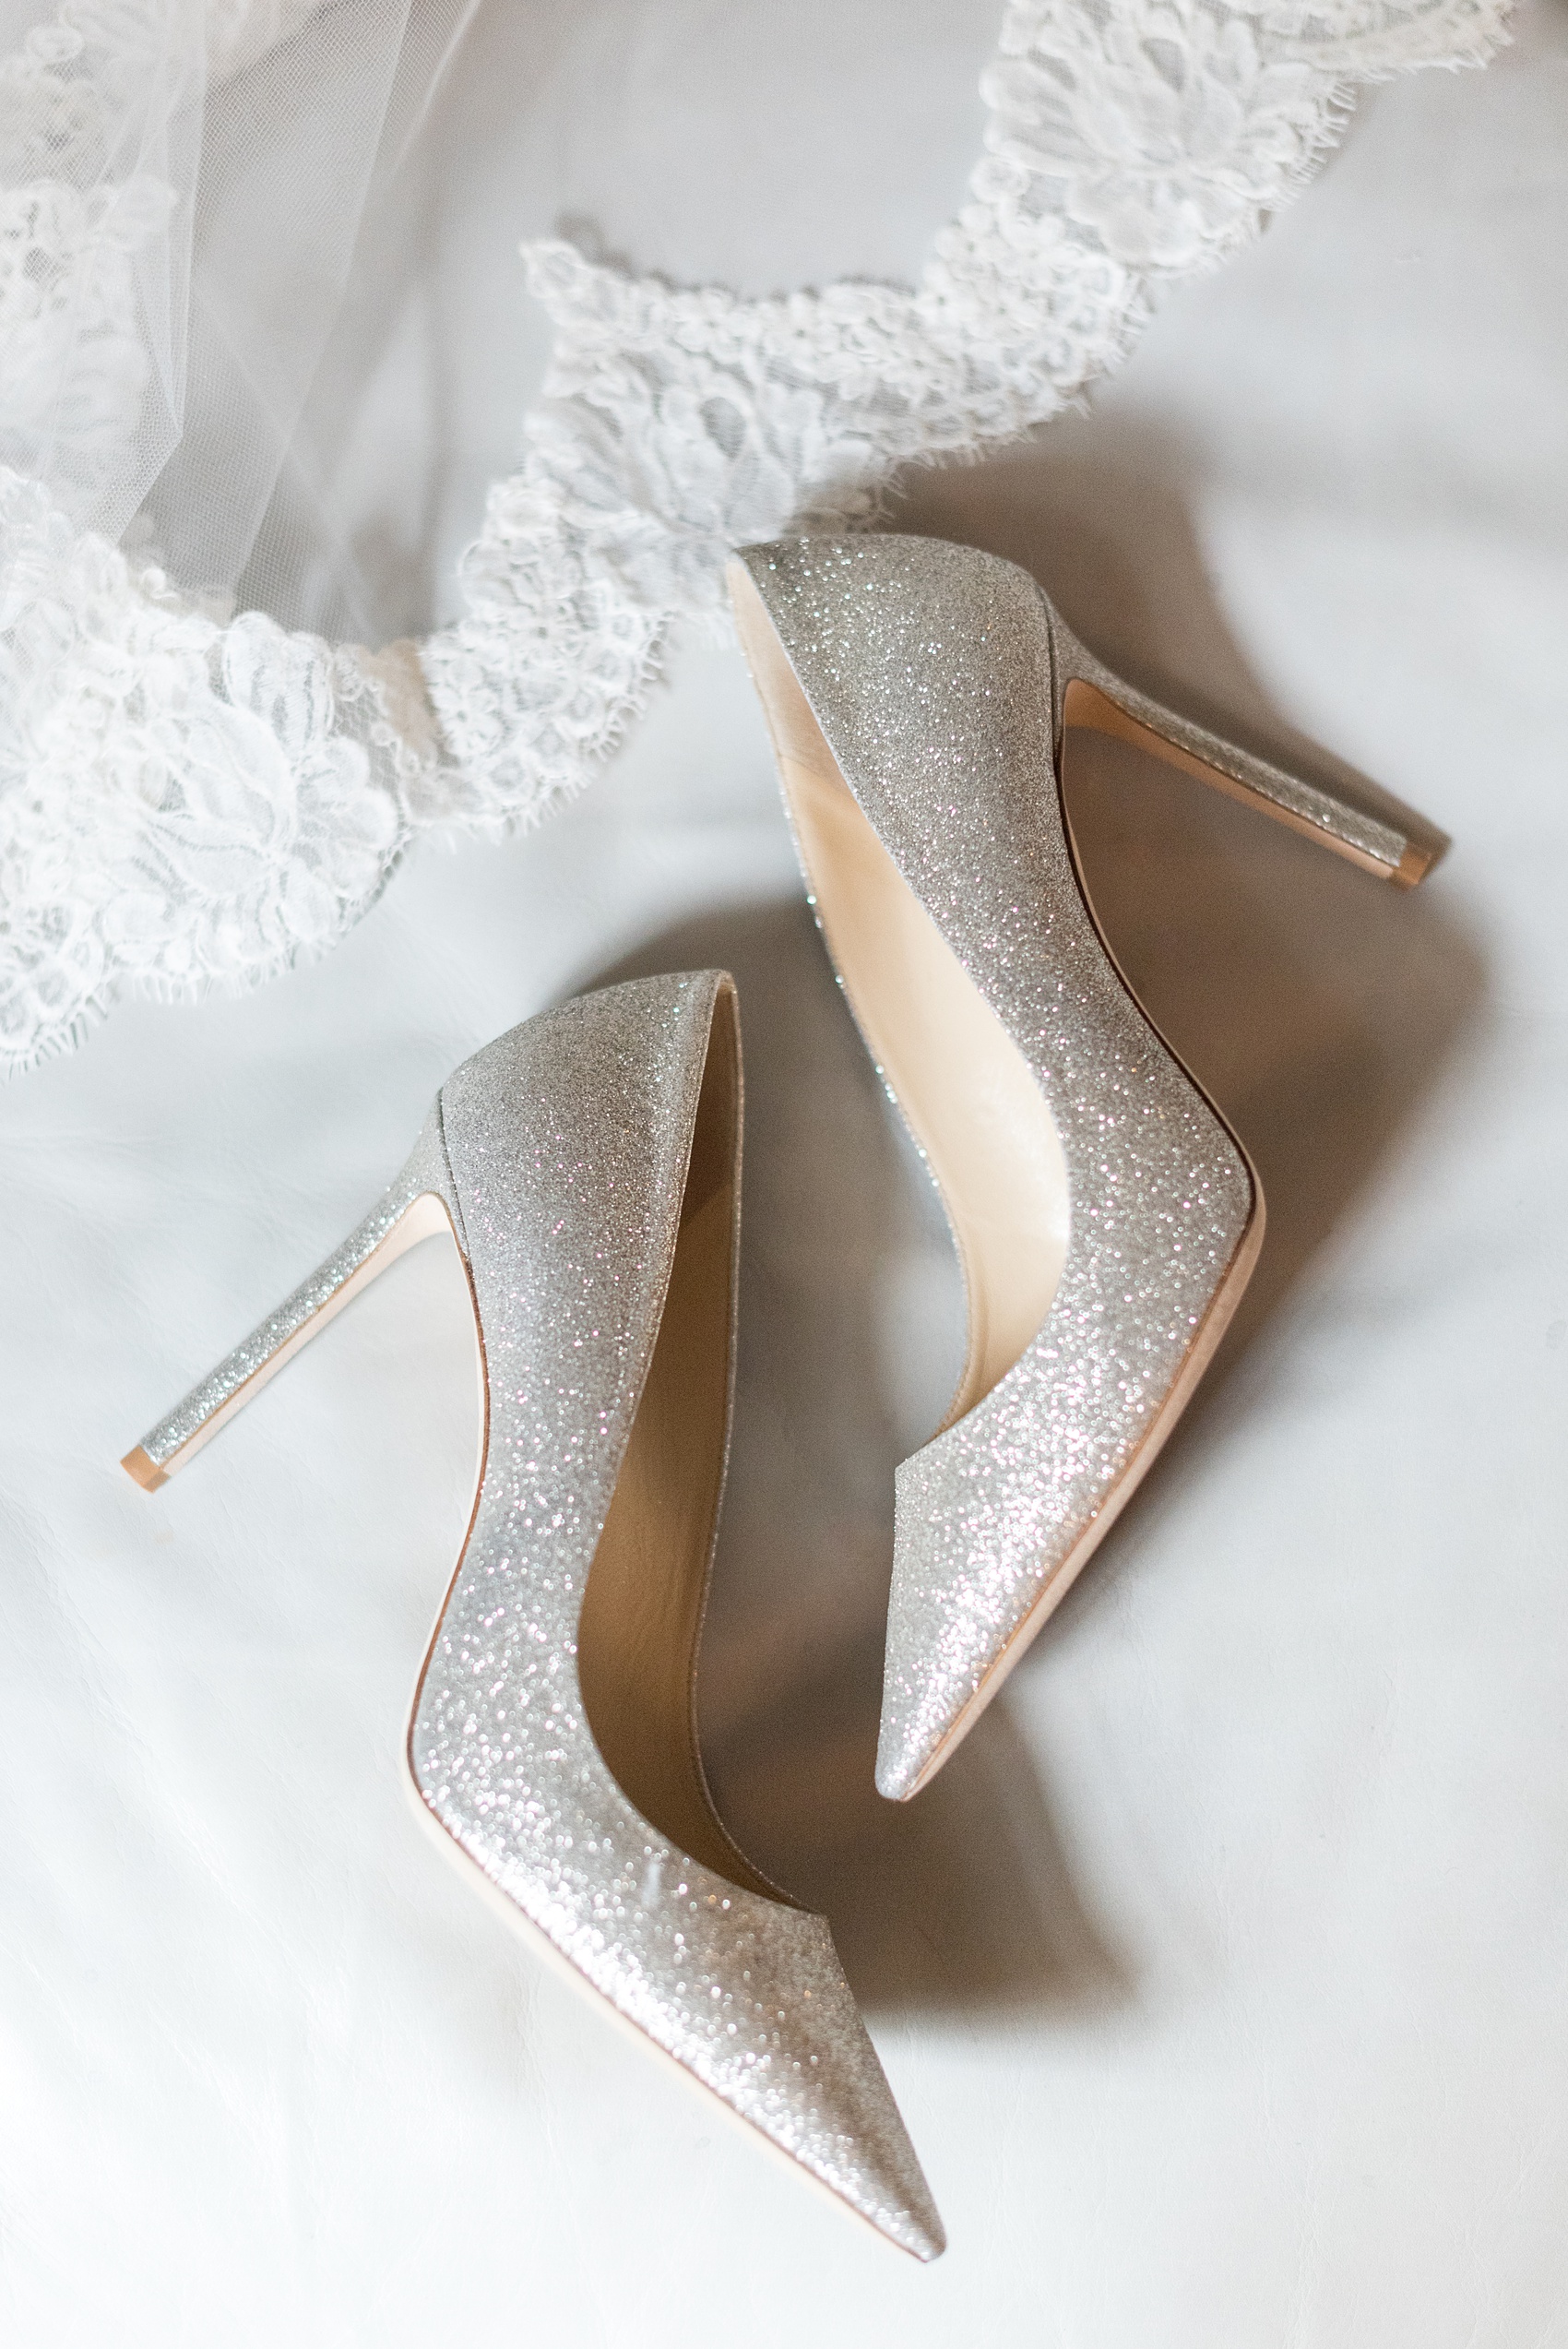 Beautiful wedding photos at The Carolina Inn at Chapel Hill, North Carolina by Mikkel Paige Photography. This venue has beautiful indoor and outdoor picture locations for ceremony, reception and bride and groom images. Click through to the post for more beautiful details like these glitter Jimmy Choo heels! #thecarolinainn #chapelhillweddingphotos #chapelhillwedding #southernwedding #mikkelpaige #southernwedding #weddingshoes #glitterheels #jimmychoos